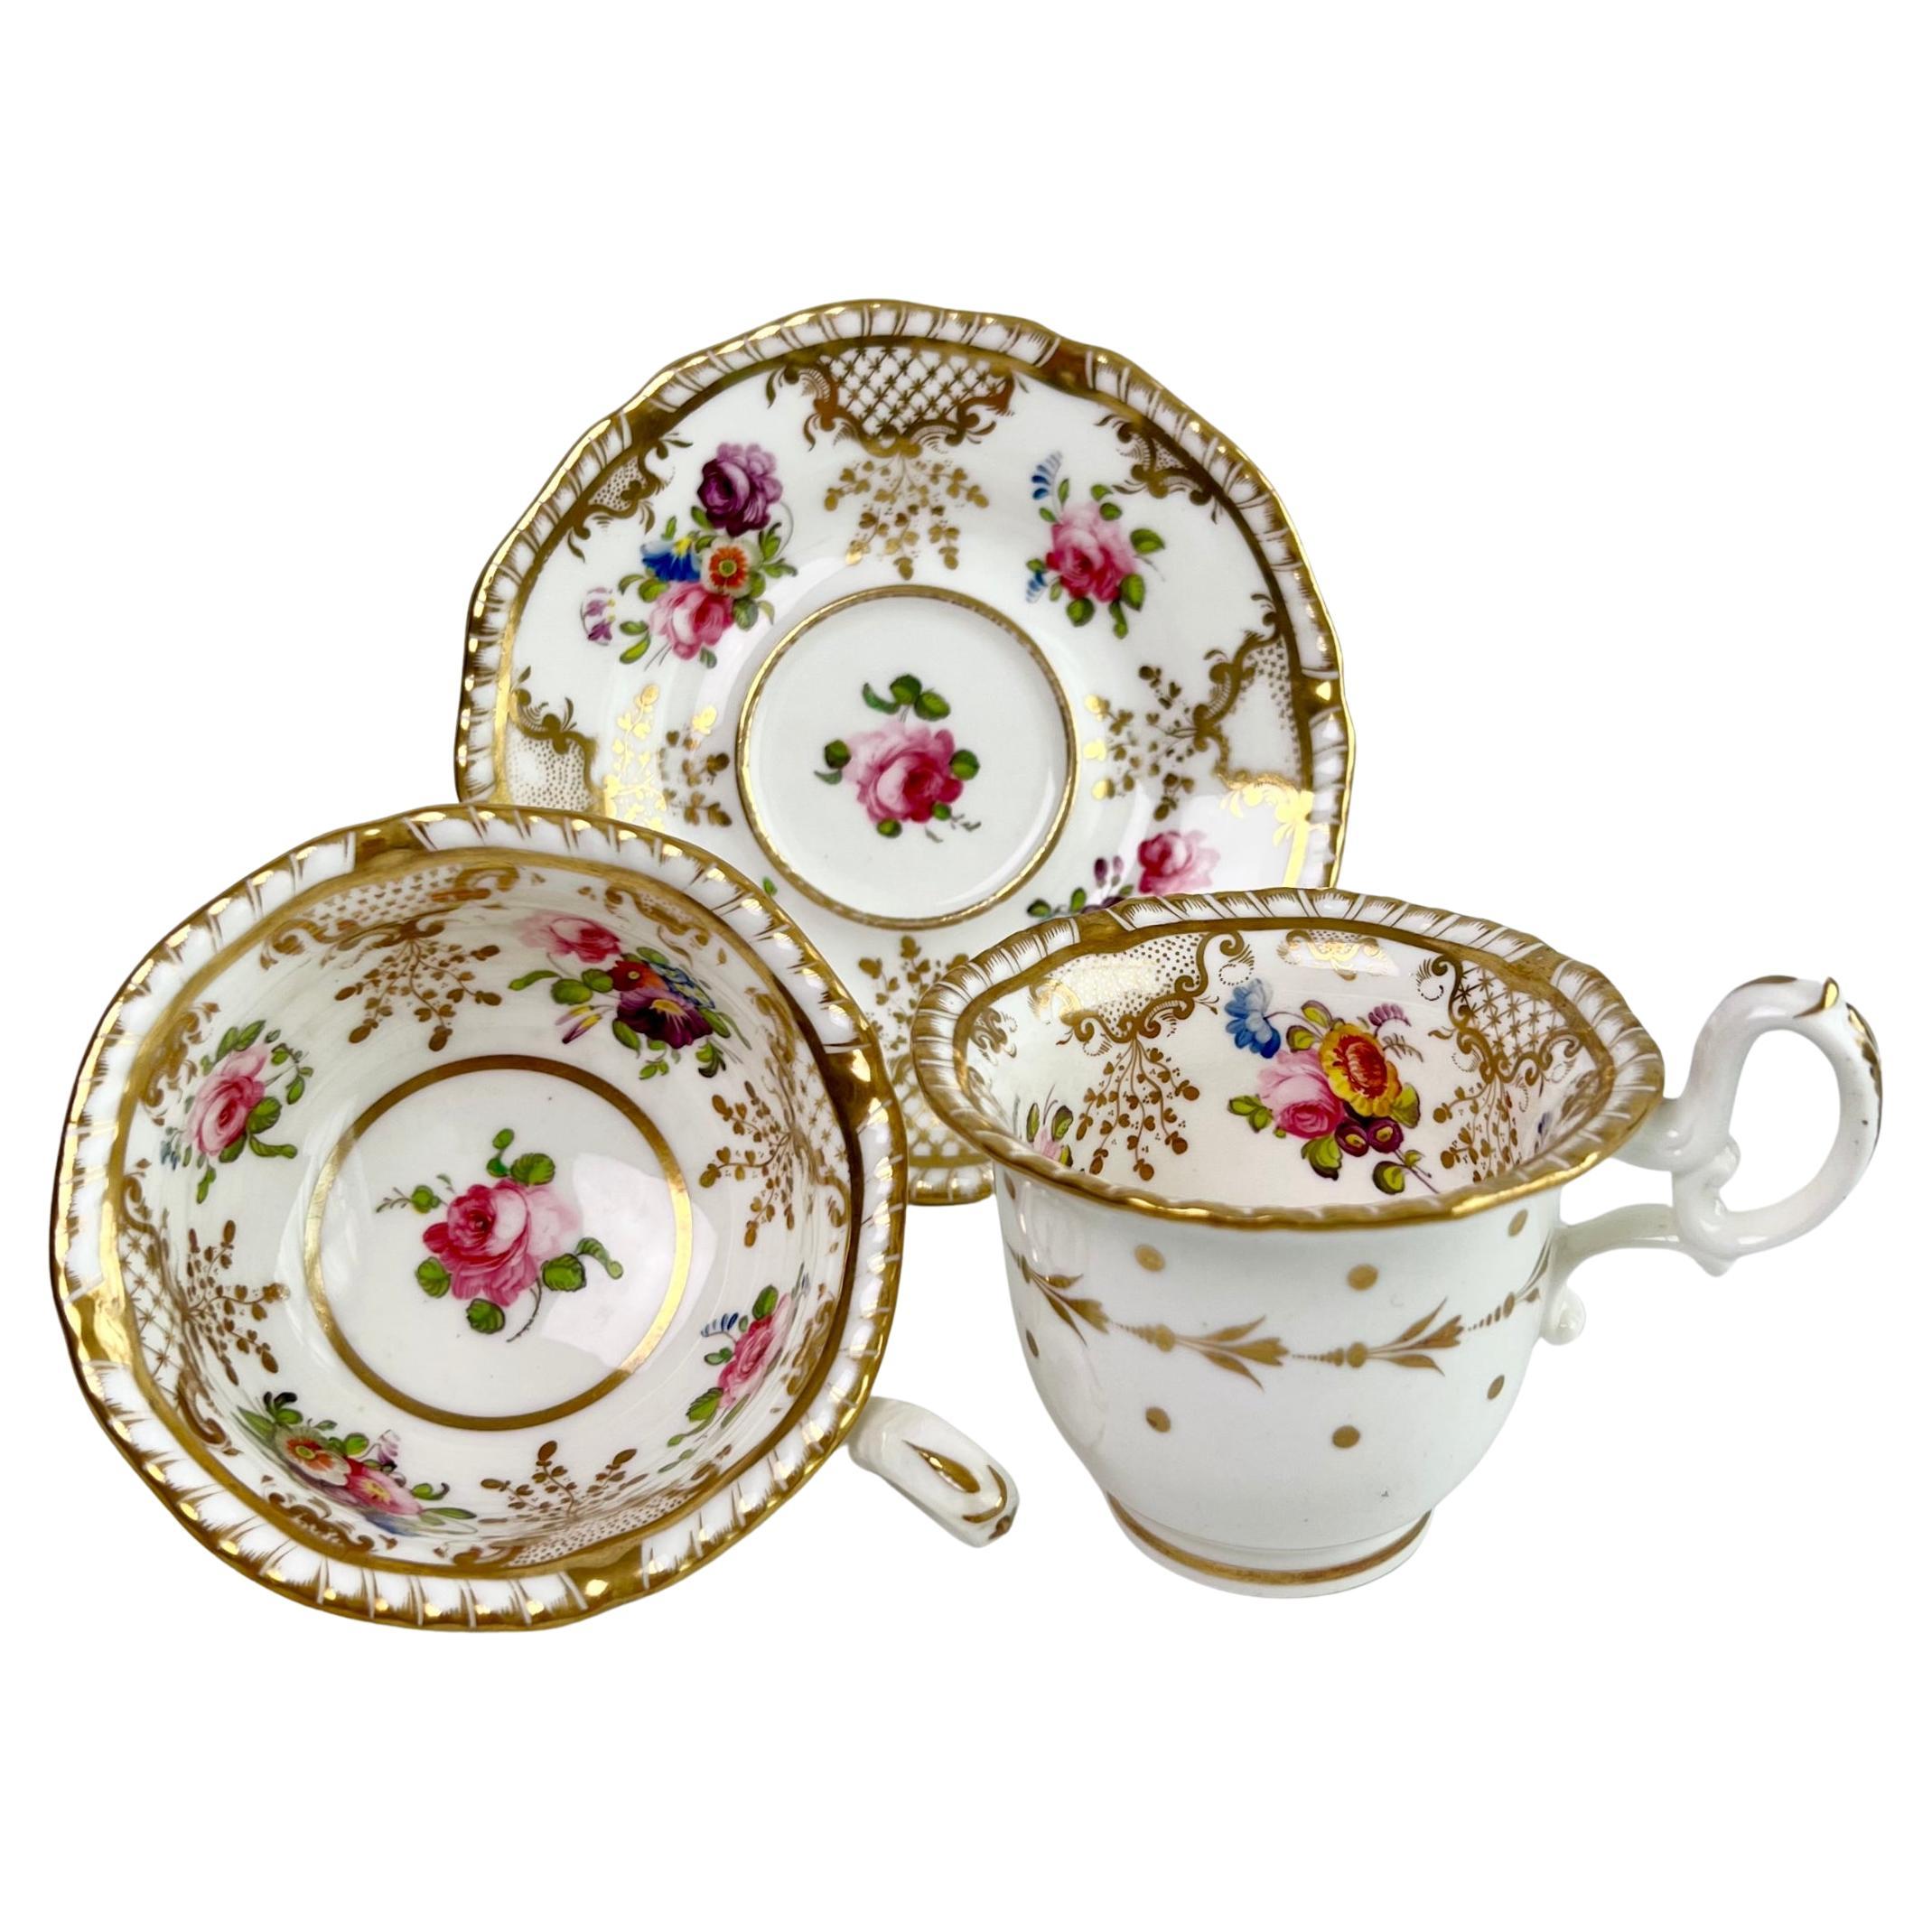 H & R Daniel Teacup Trio, White with Gilt and Floral Sprigs, Regency, ca 1825